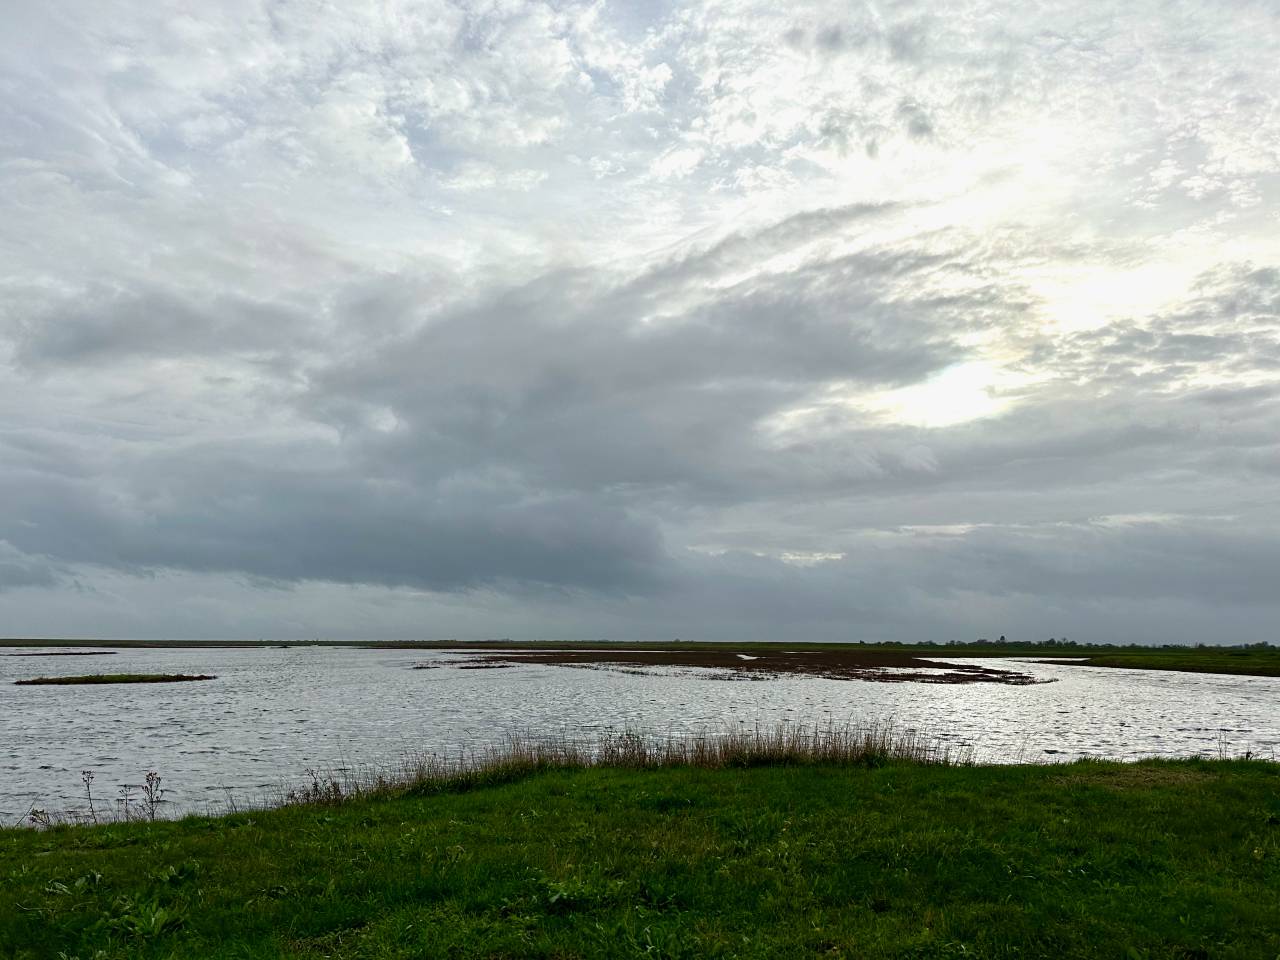 Over half of the UK's salt marshes were lost in recent centuries, drained for agriculture and development. /CGTN Europe